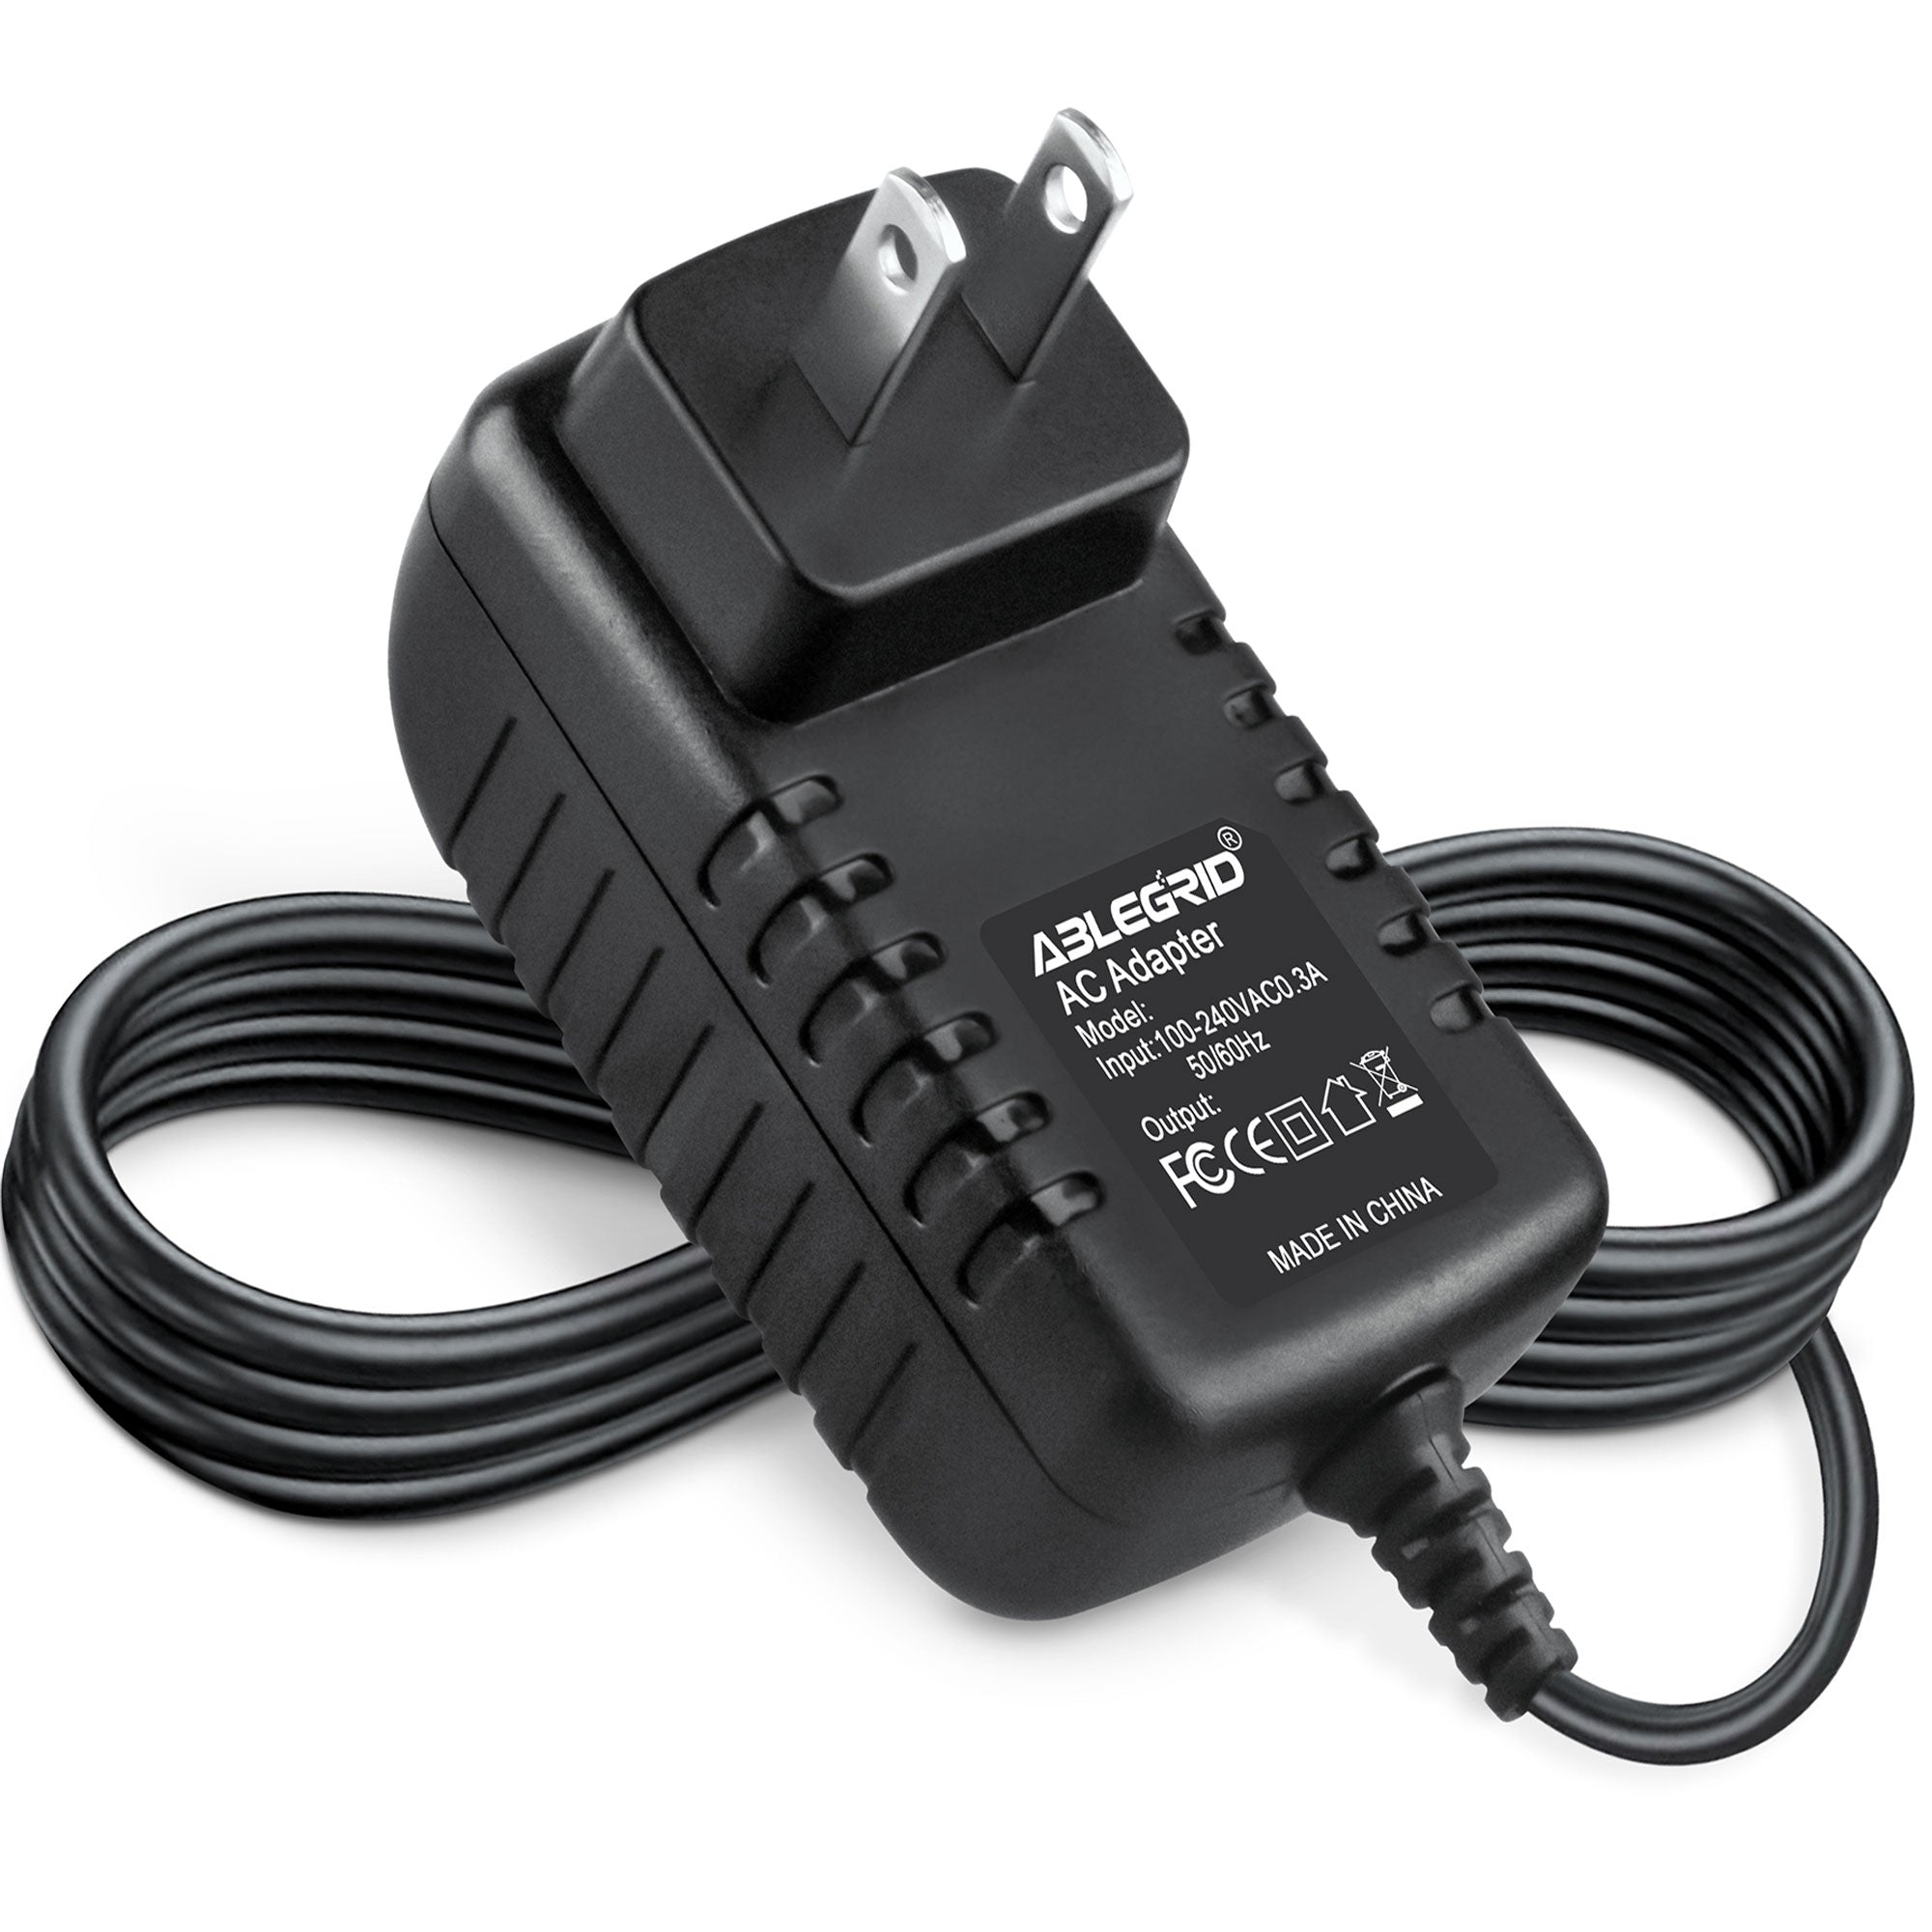 AbleGrid 6V AC / DC Adapter for Zoom Model: 5341 Cable Modem 3.0 Series 1079 6VDC Power Supply Cord Cable PS Wall Home Charger Input: 100V - 120V AC - 240 VAC 50/60Hz Worldwide Voltage Use Mains PSU